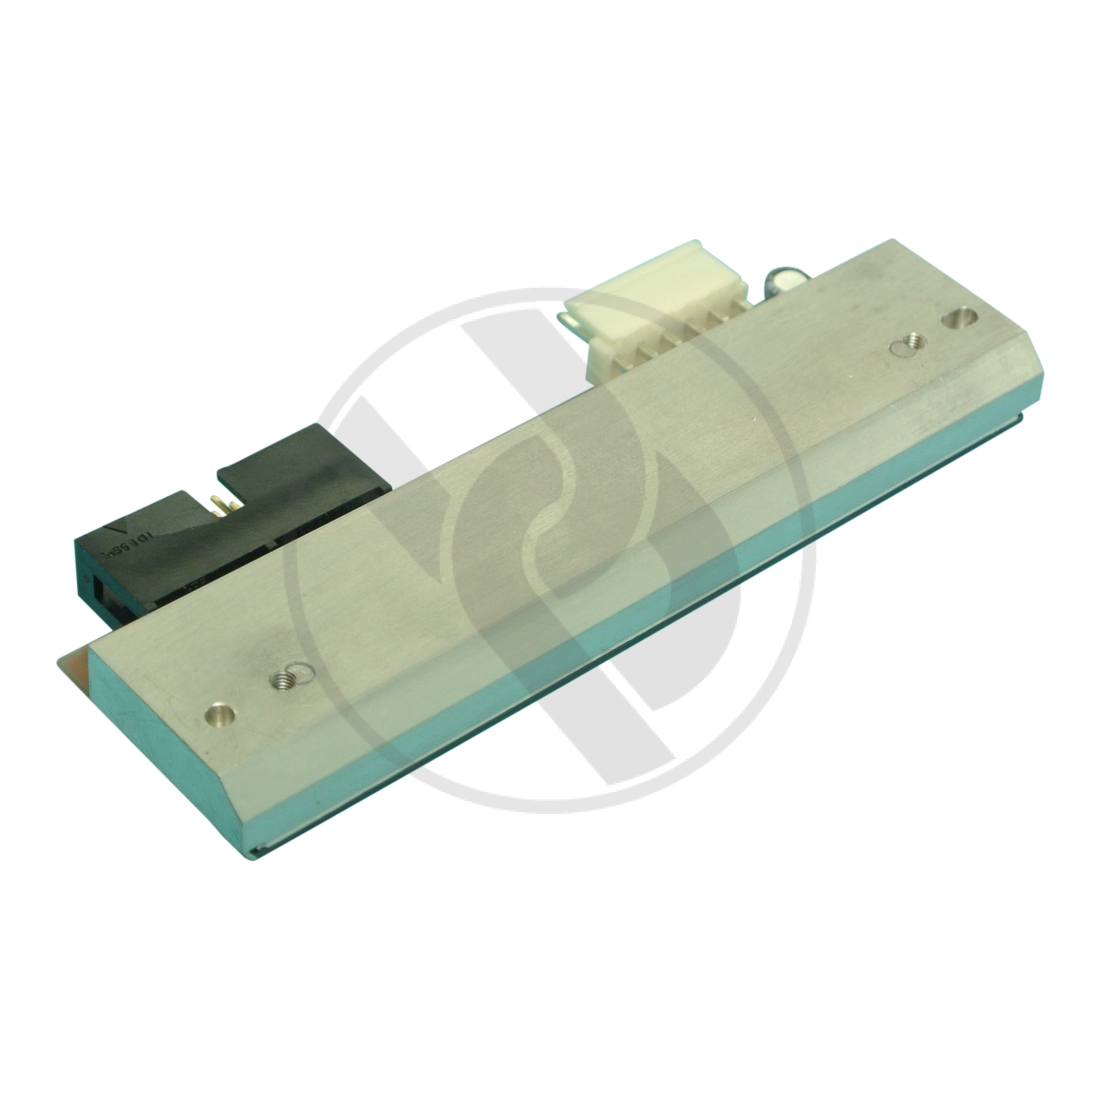 Thermal printhead, 107 mm, for DataFlex